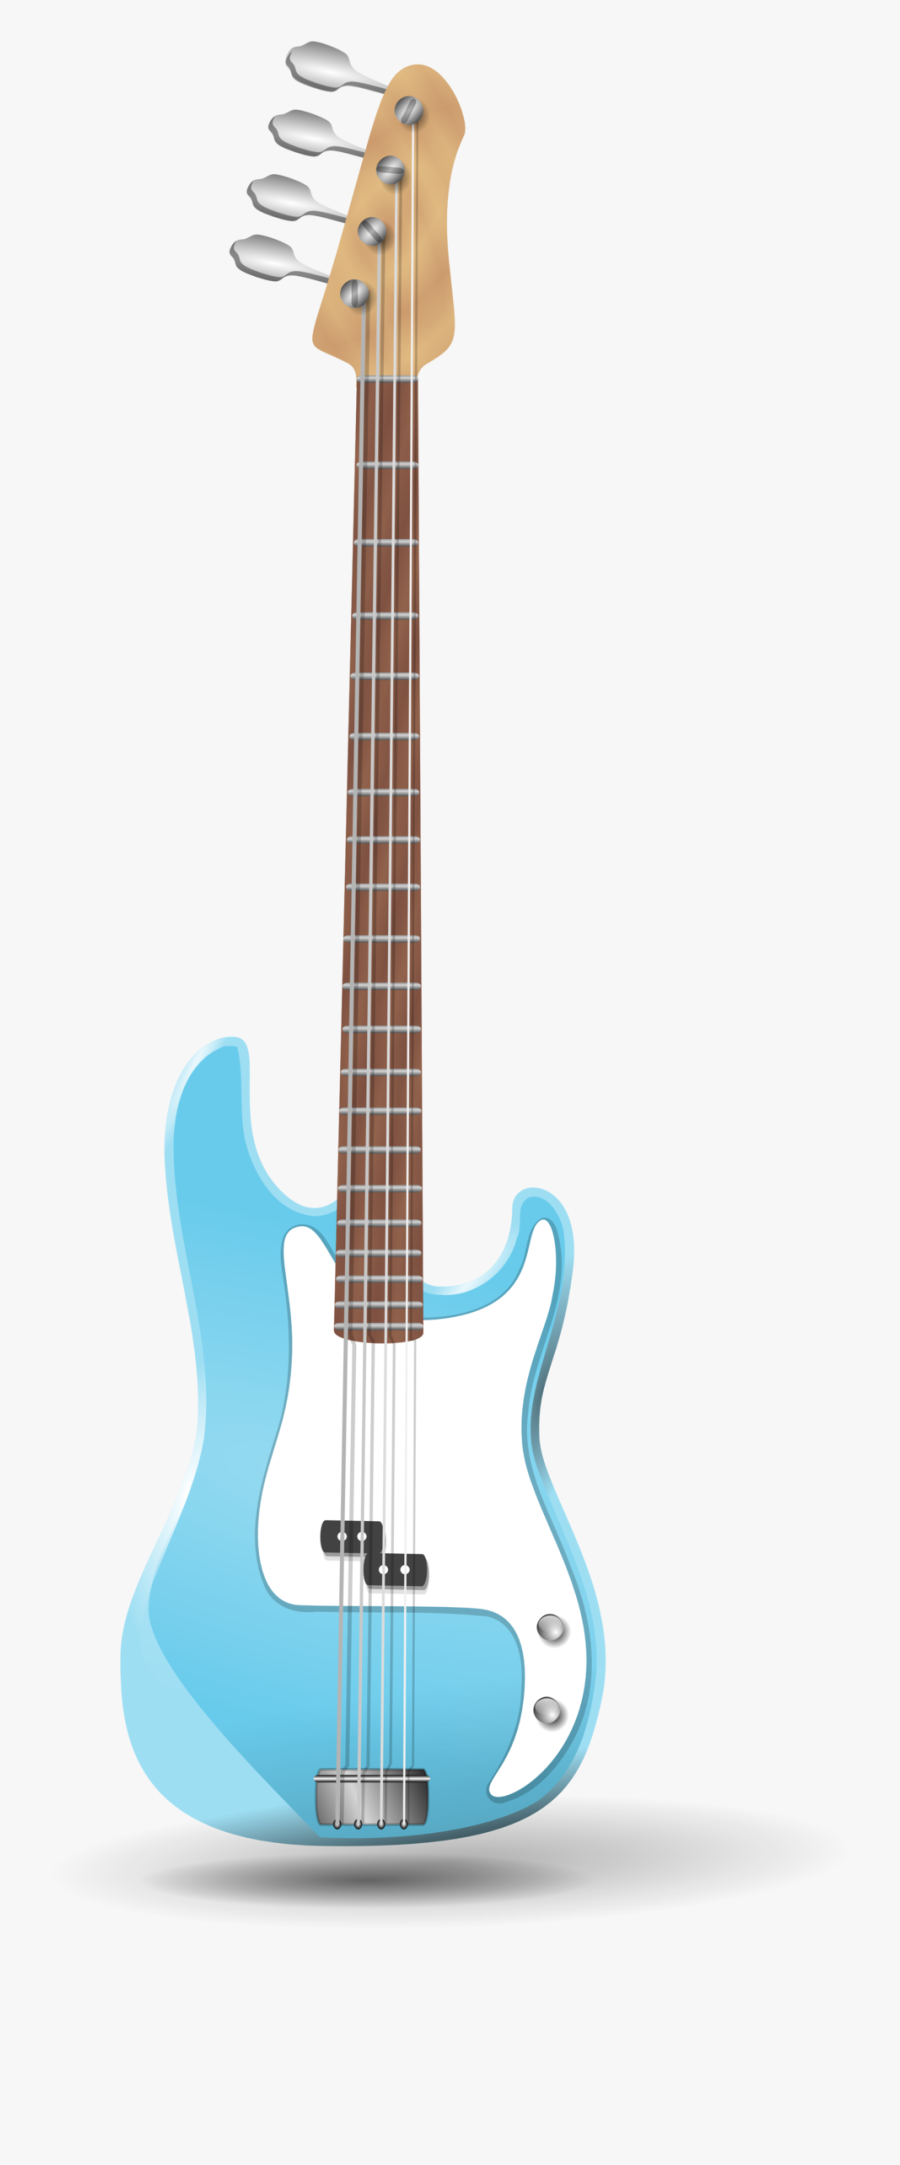 Bass Guitar With Wings, Transparent Clipart